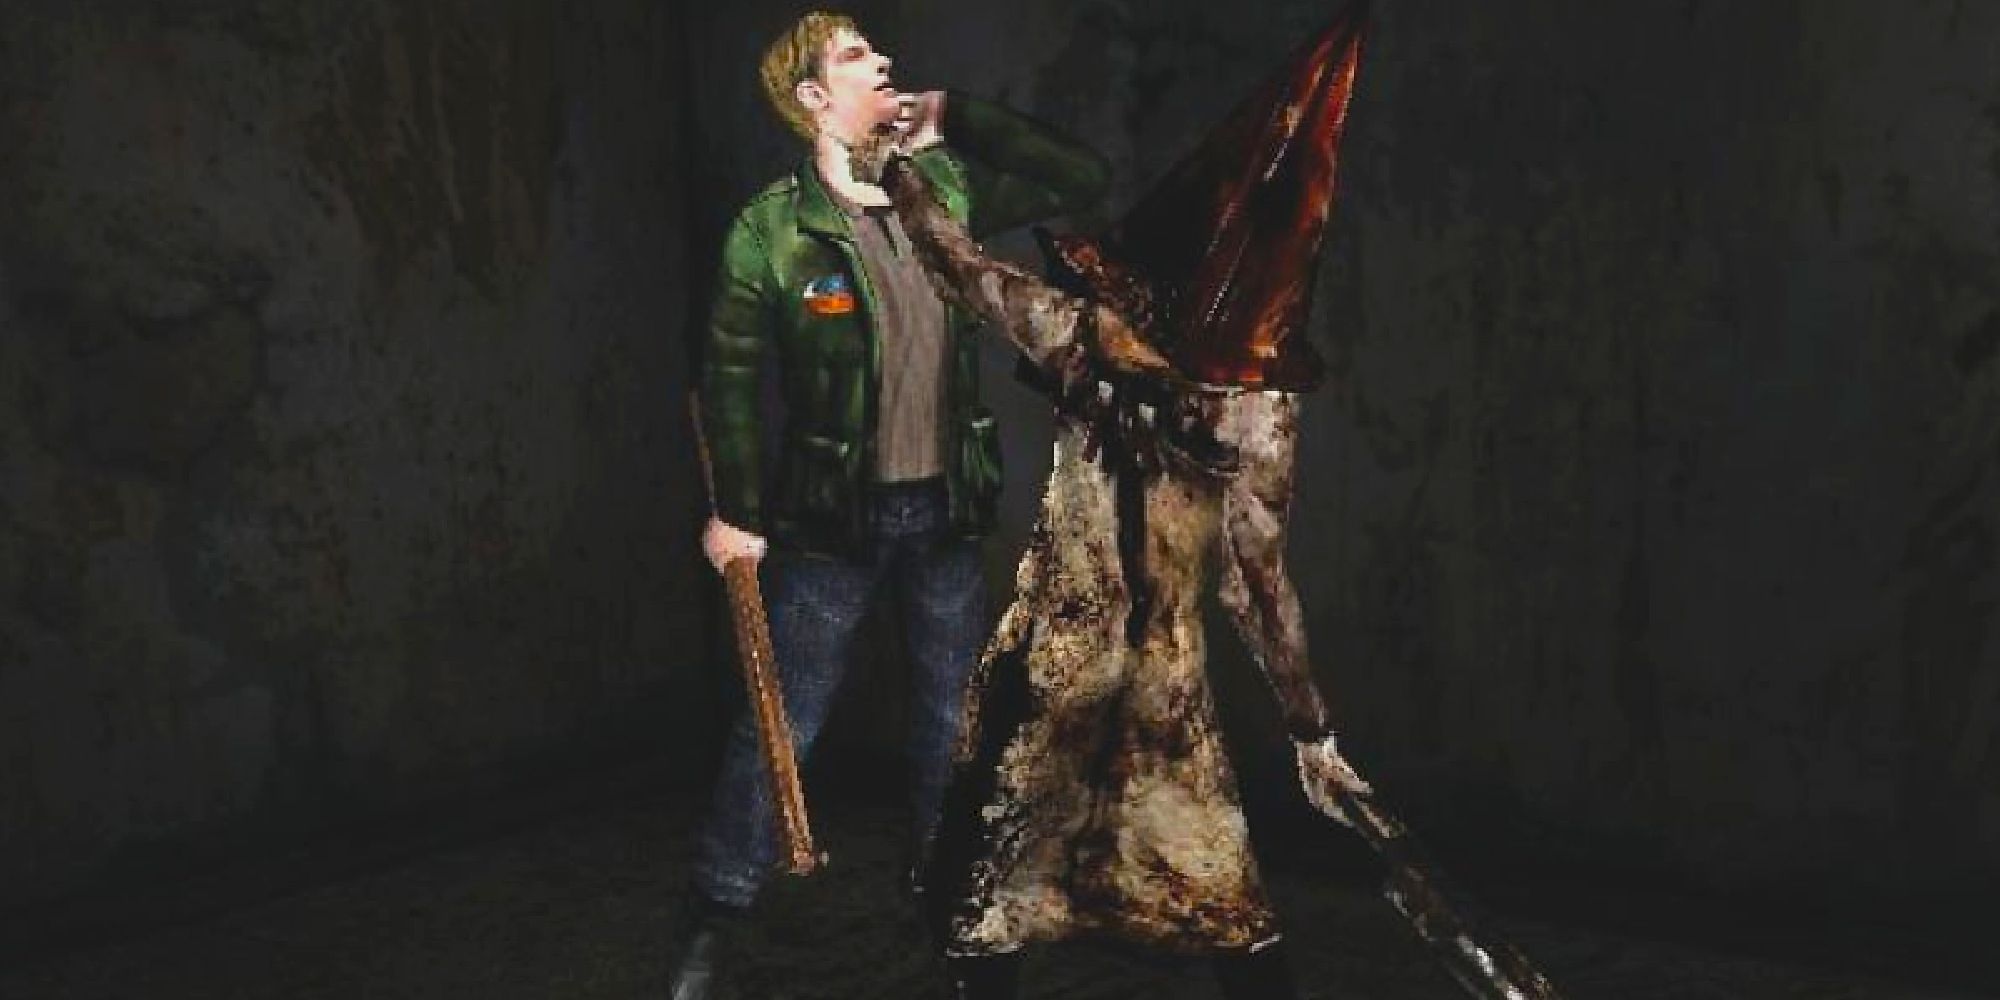 Silent Hill Pyramid Head grabbing James by the throat and lifting him into the air